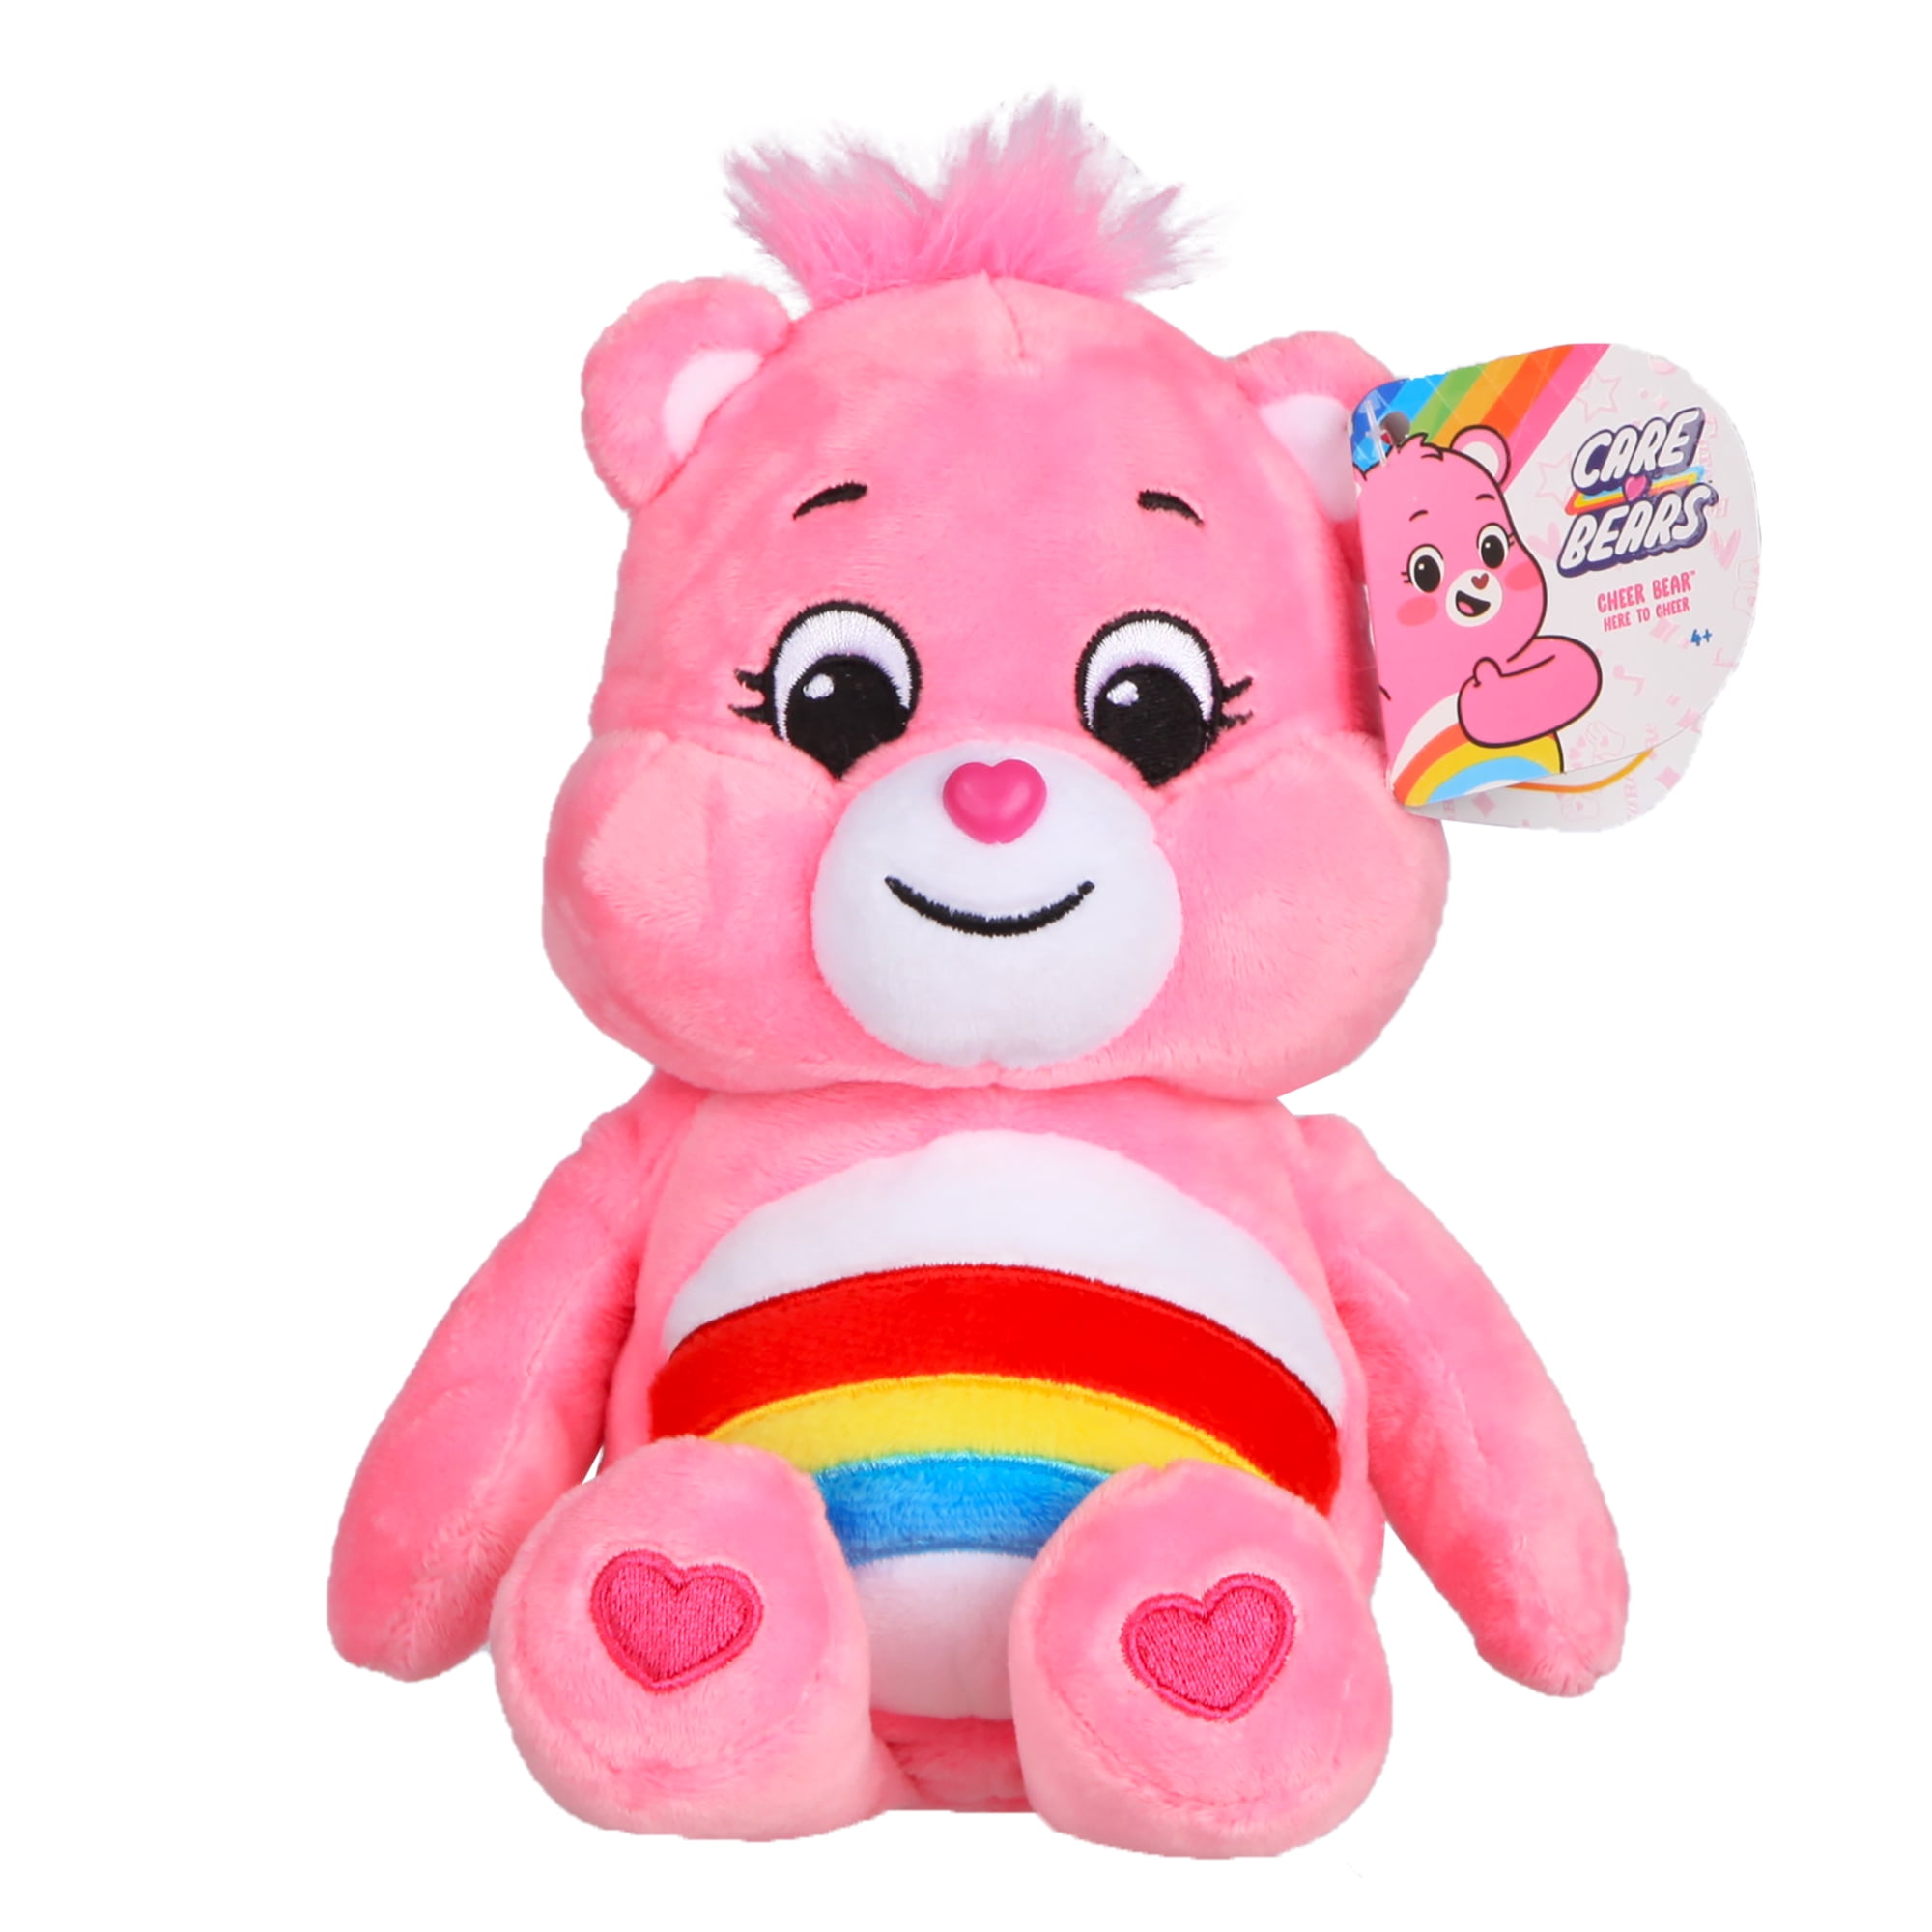 Care Bears Hopeful Heart Bear Plush Small 8" Stuffed Animal Toy With Tag 2016 for sale online 